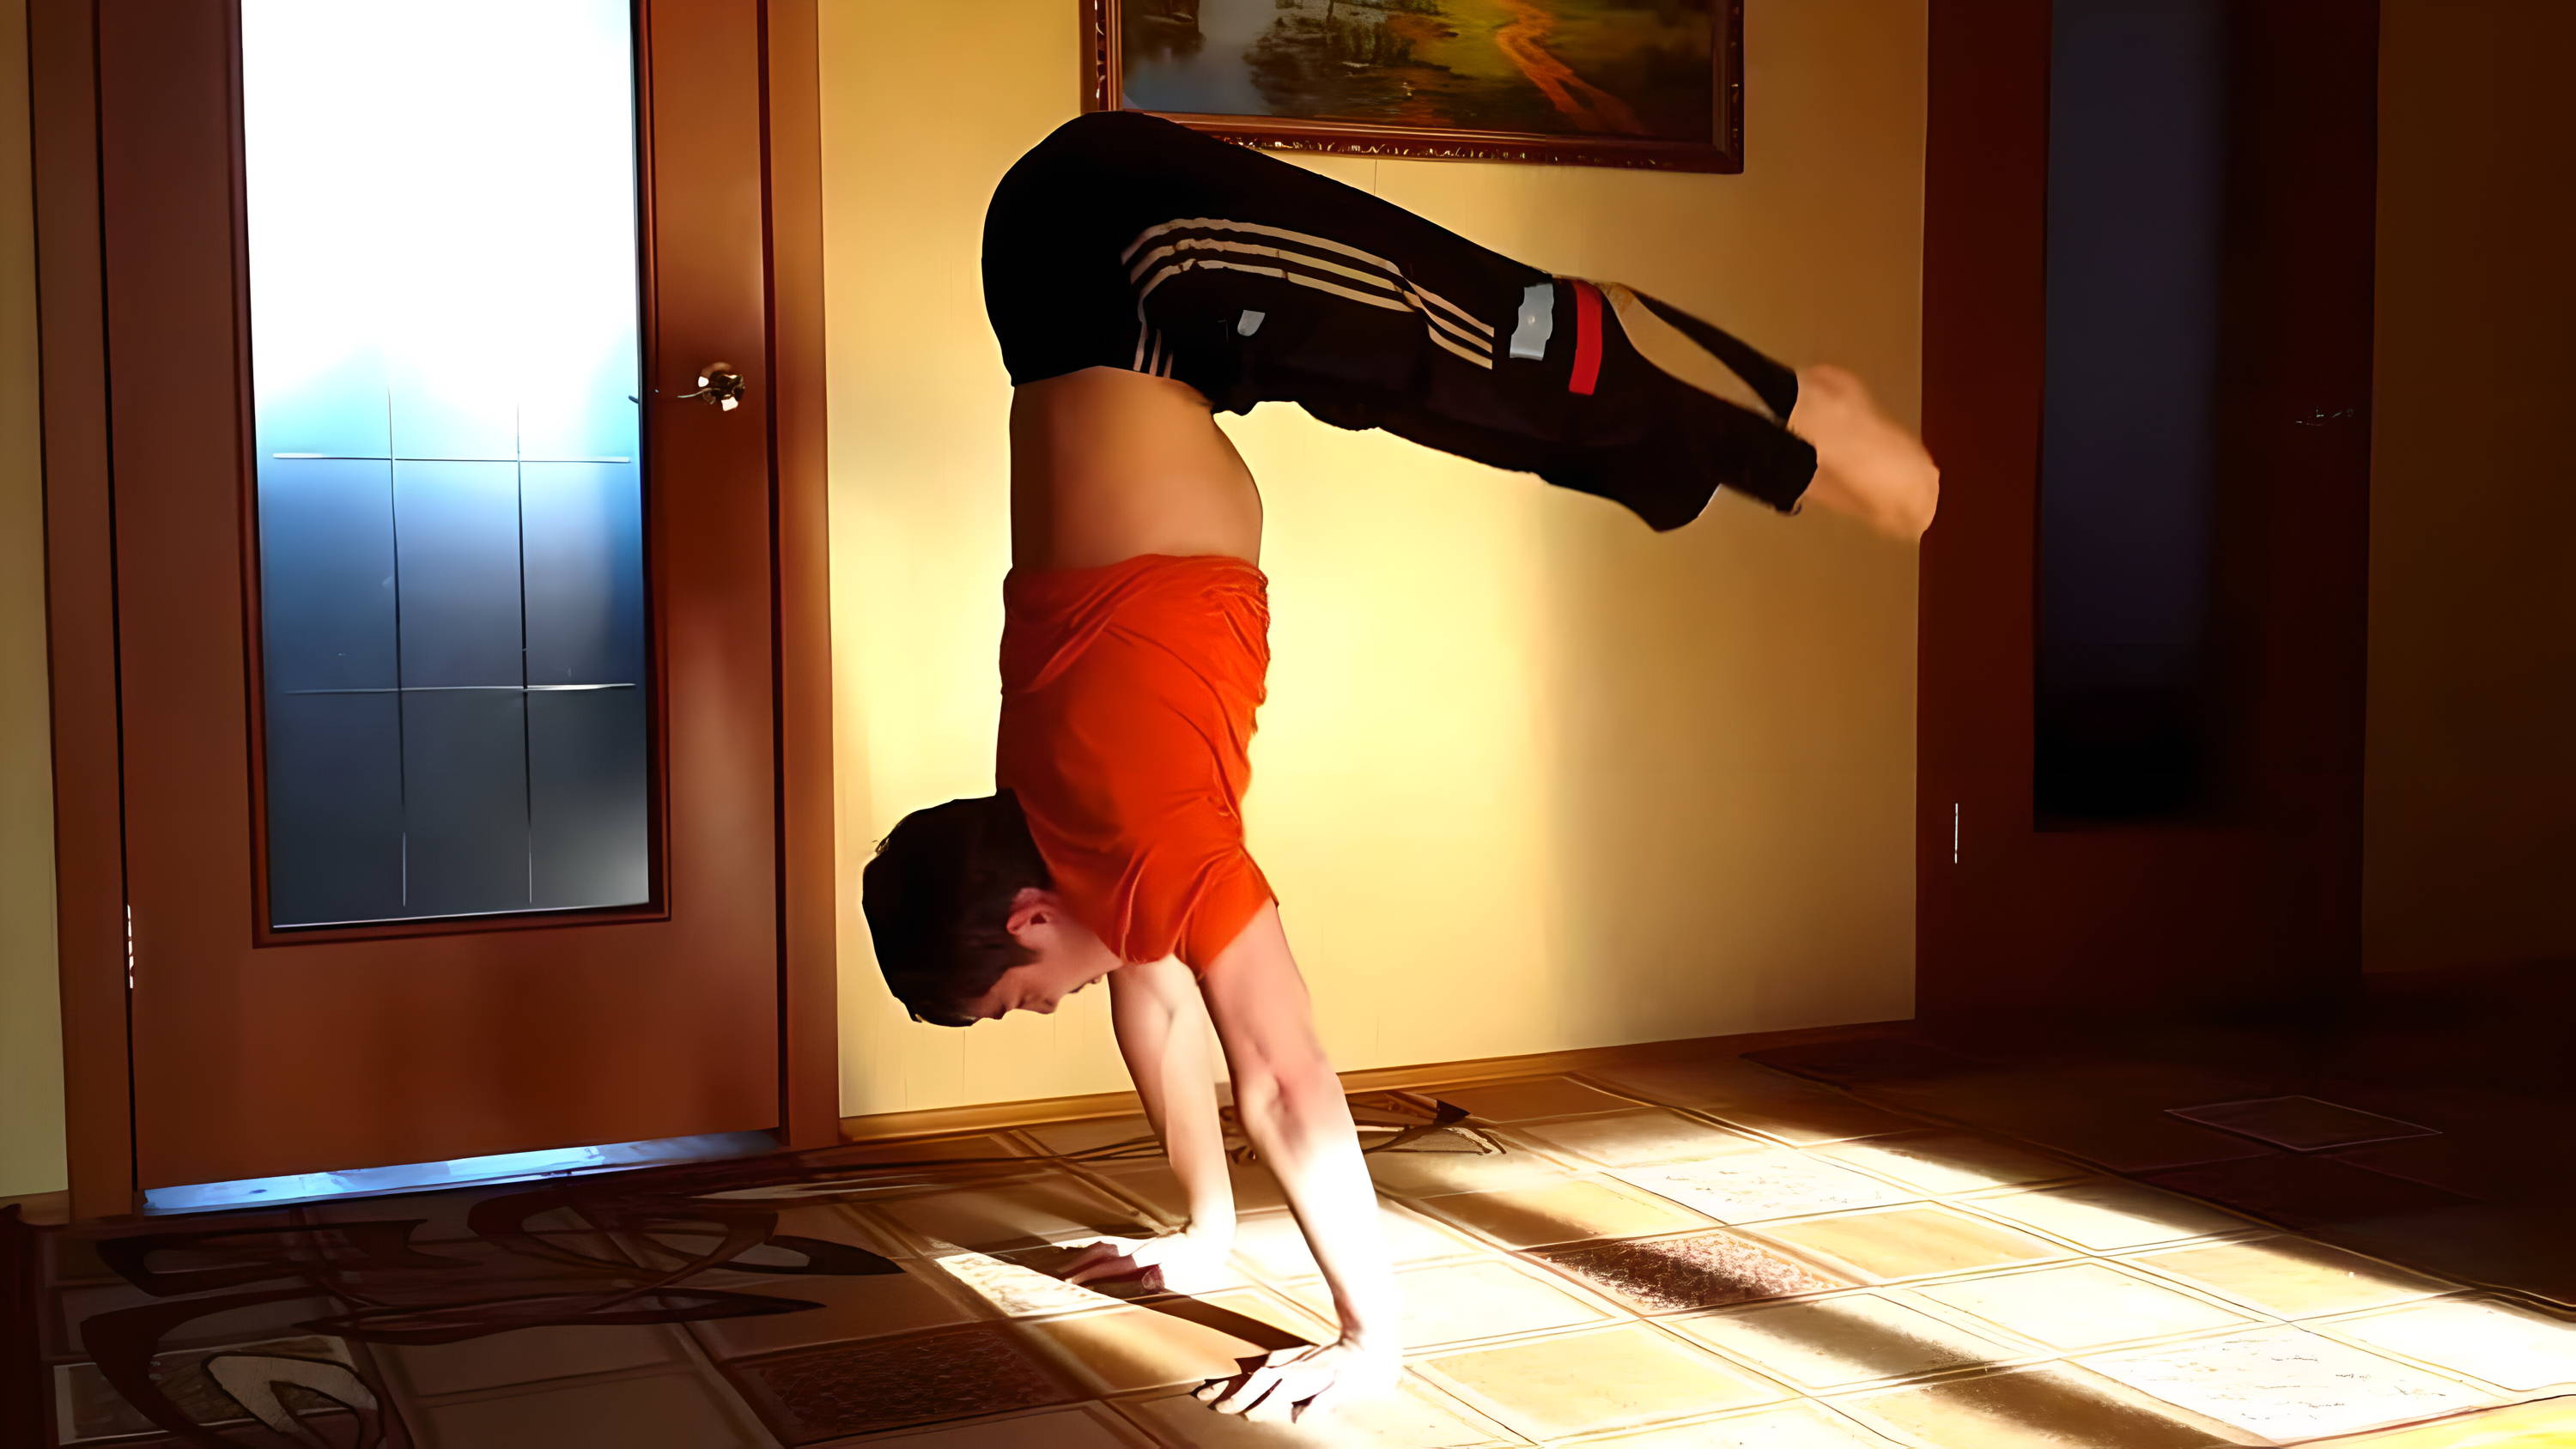 Doing Press Handstand at Home